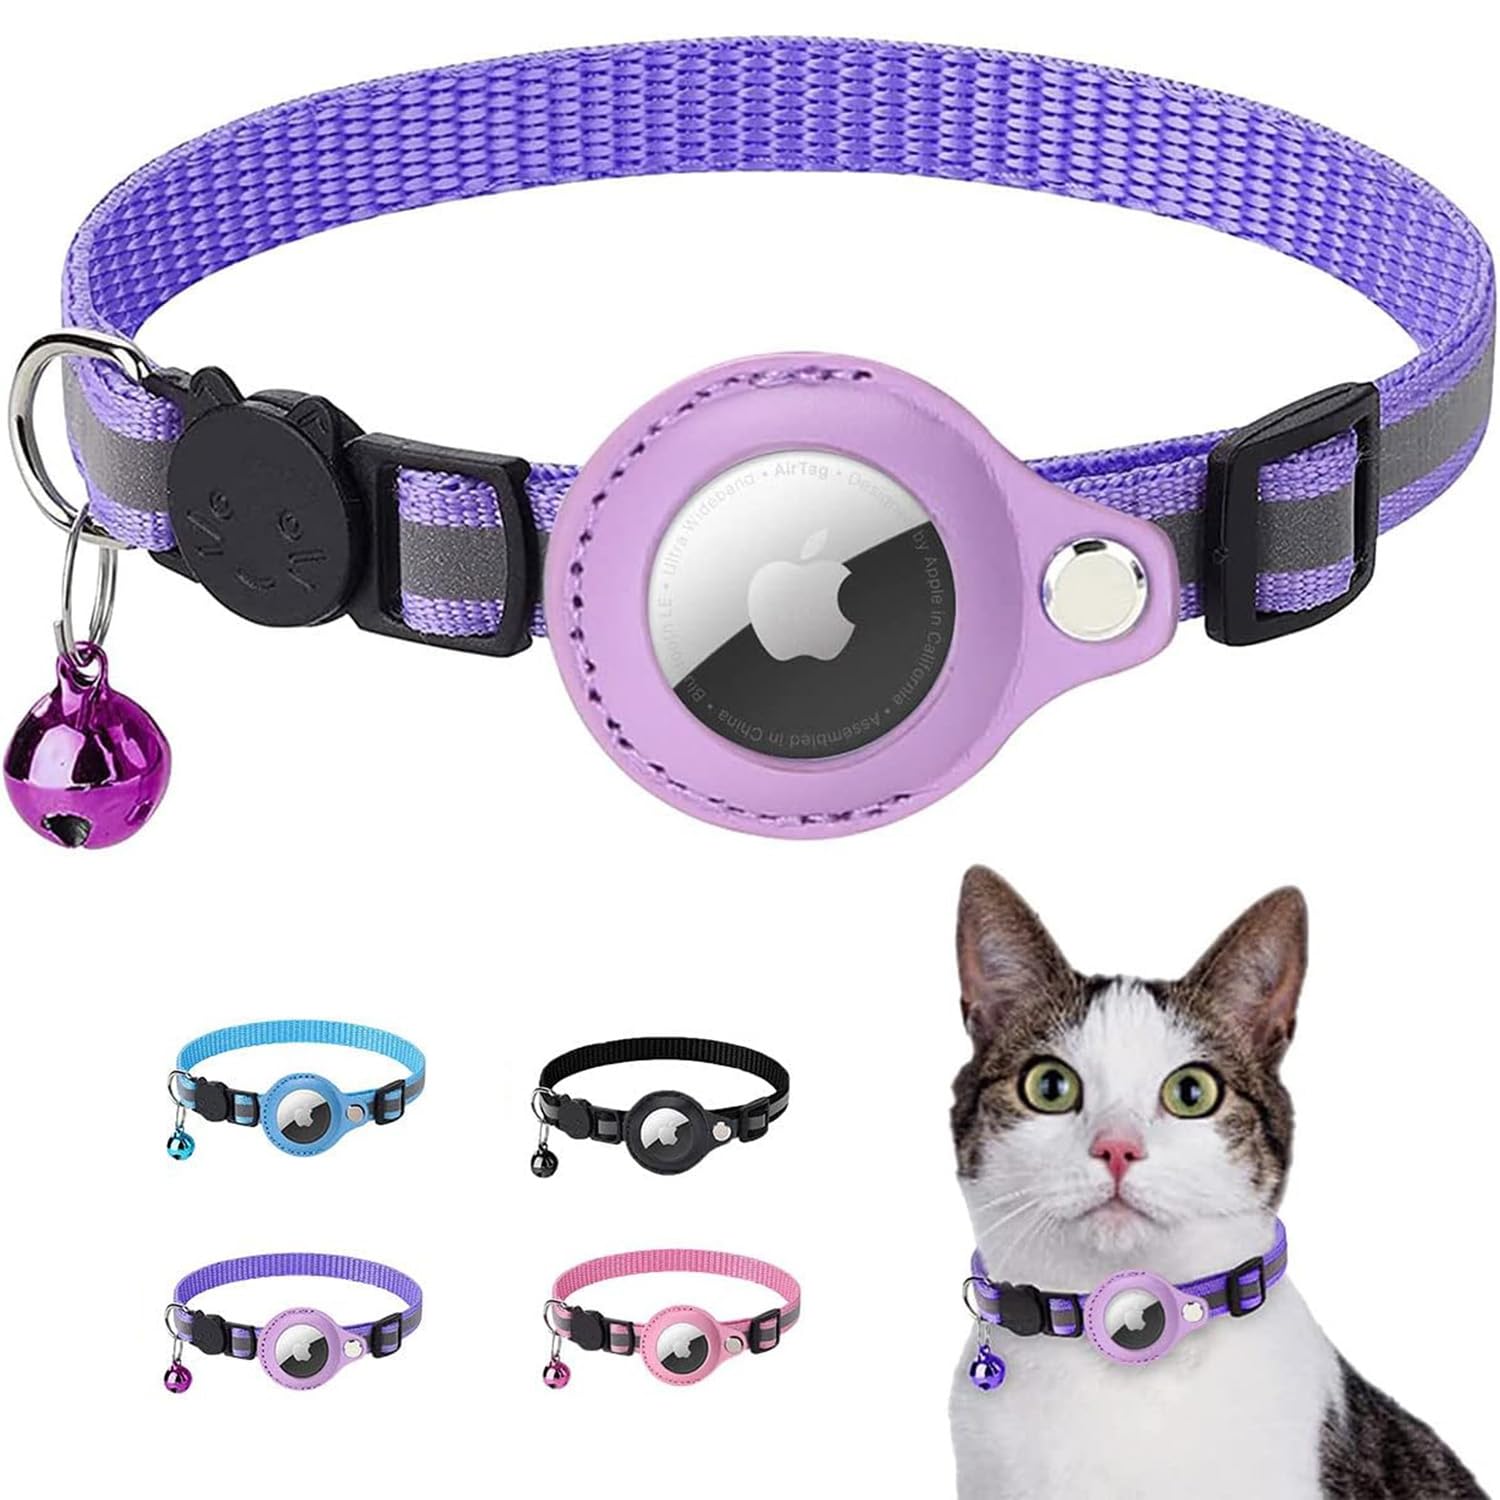 Cat Collar Breakaway with Airtag Holder - Adjustable Reflective AirTag Cat Collar with Bell Integrated Kitten Collar GPS Cat Collars Tracker for Girl Boy Cats Puppies (Purple)